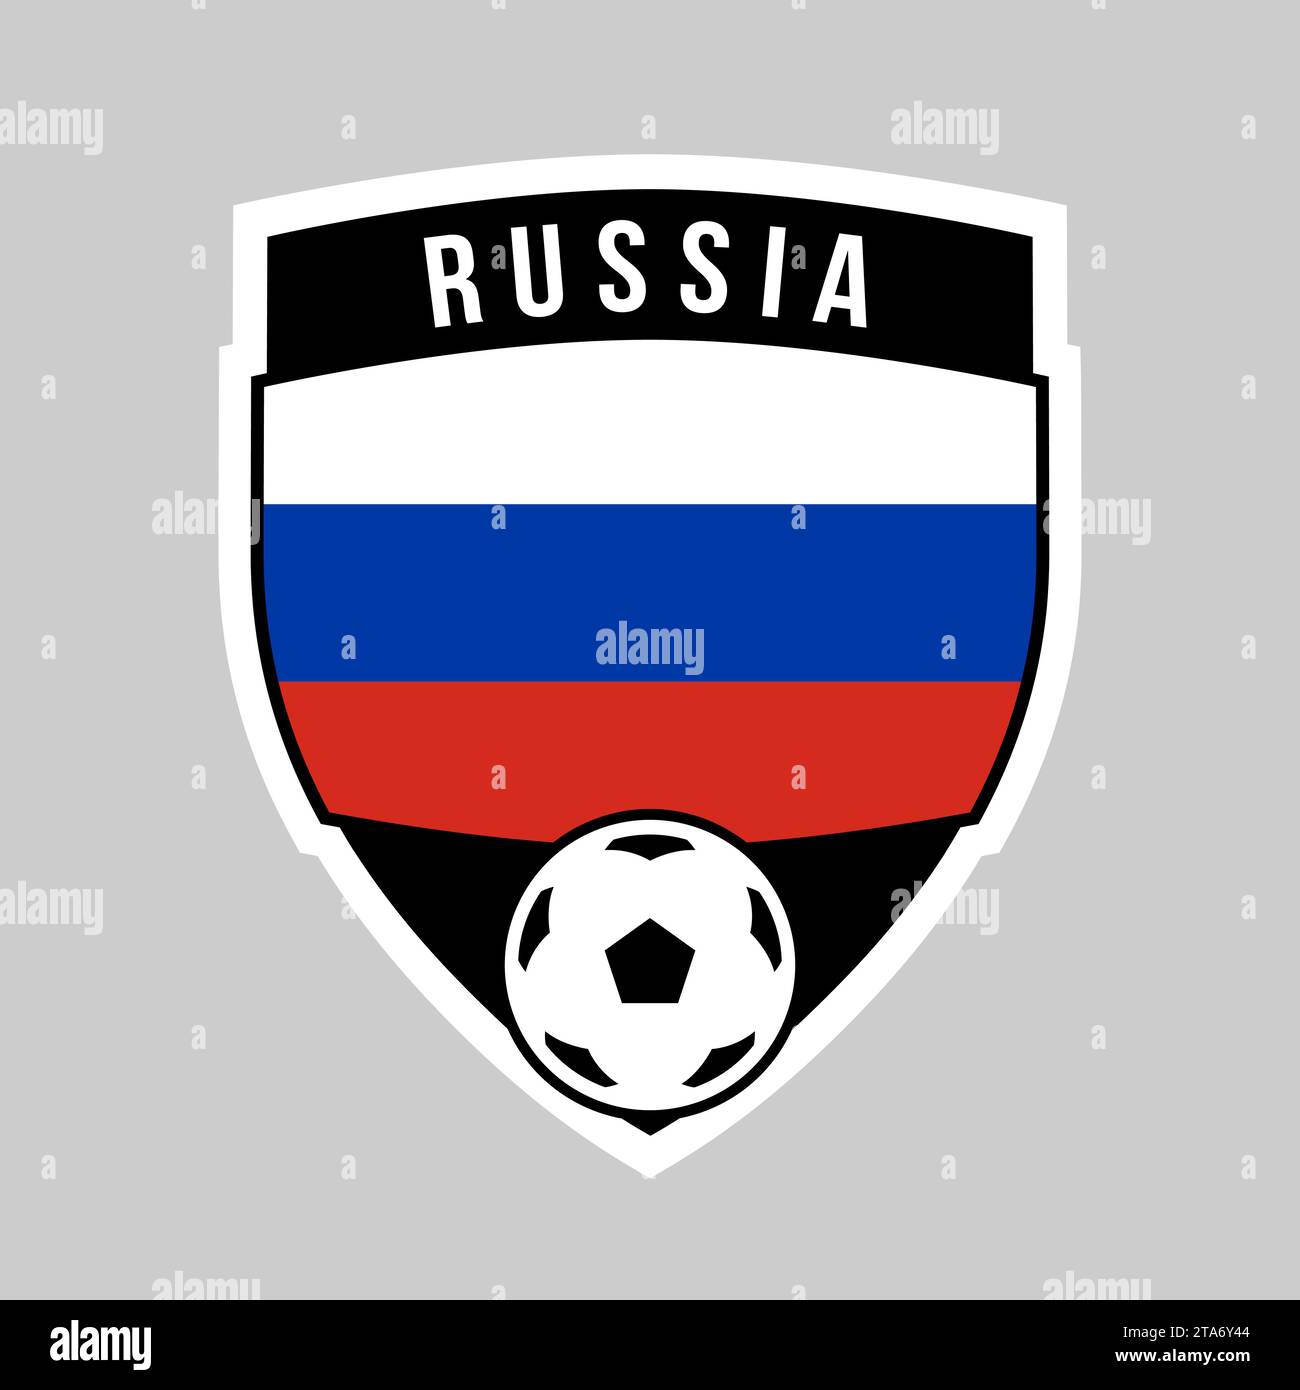 Illustration of Shield Team Badge of Russia for Football Tournament Stock Vector